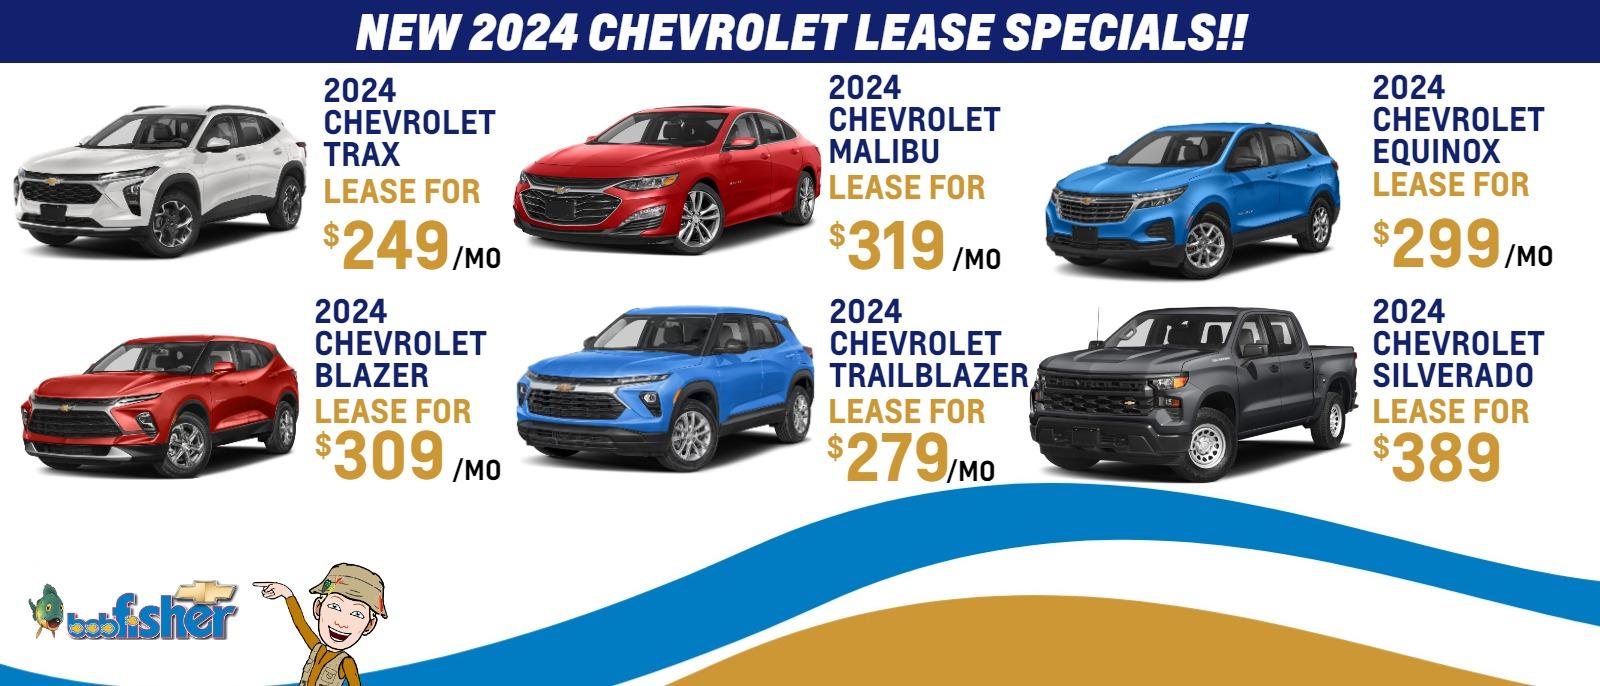 NEW 2024 CHEVROLET LEASE SPECIALS!!